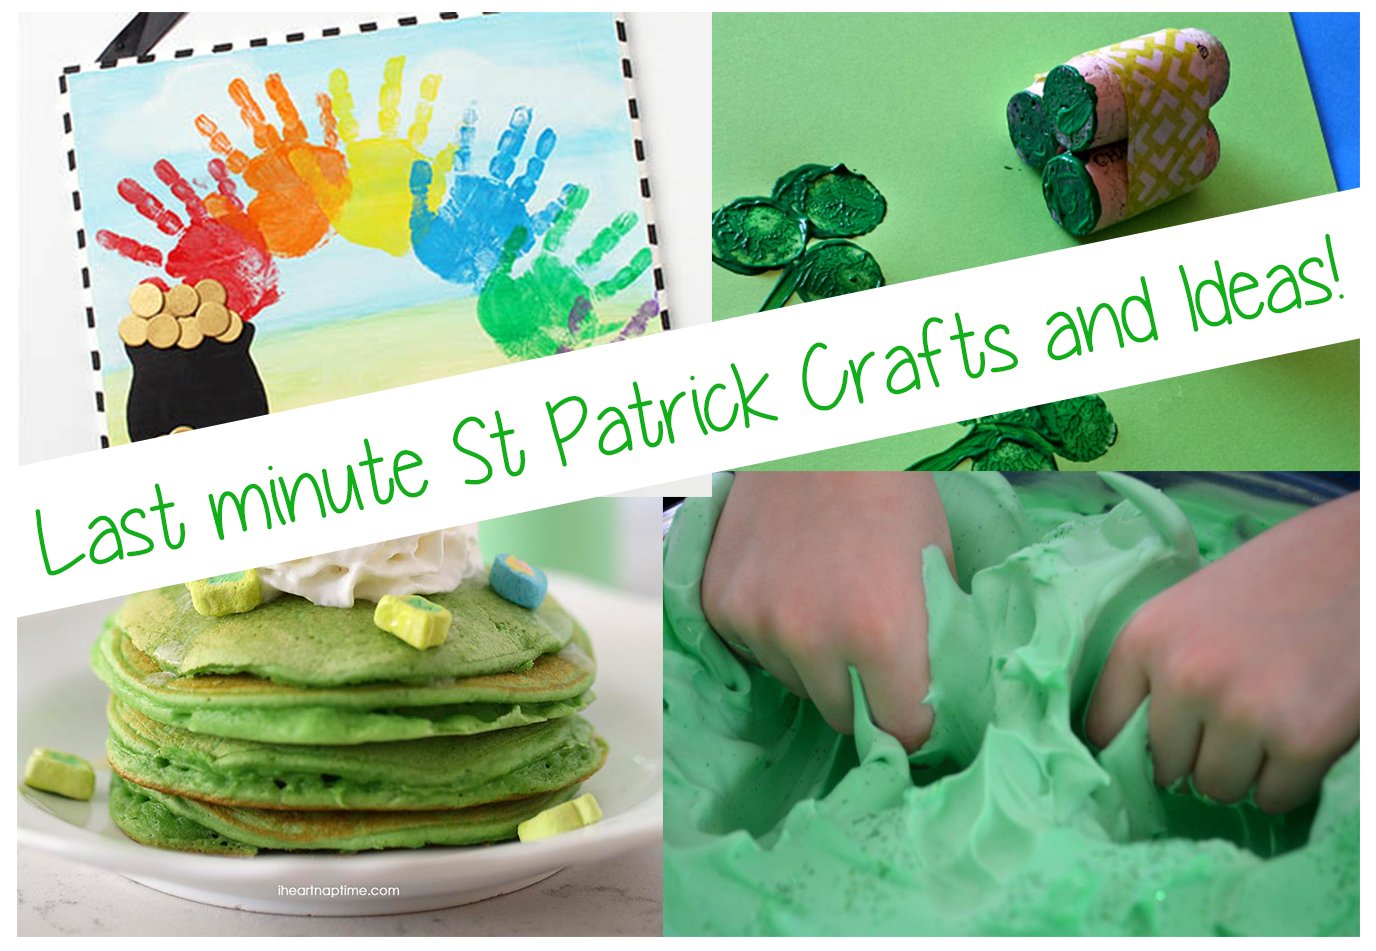 10 St Patrick day Festive Ideas and Crafts!